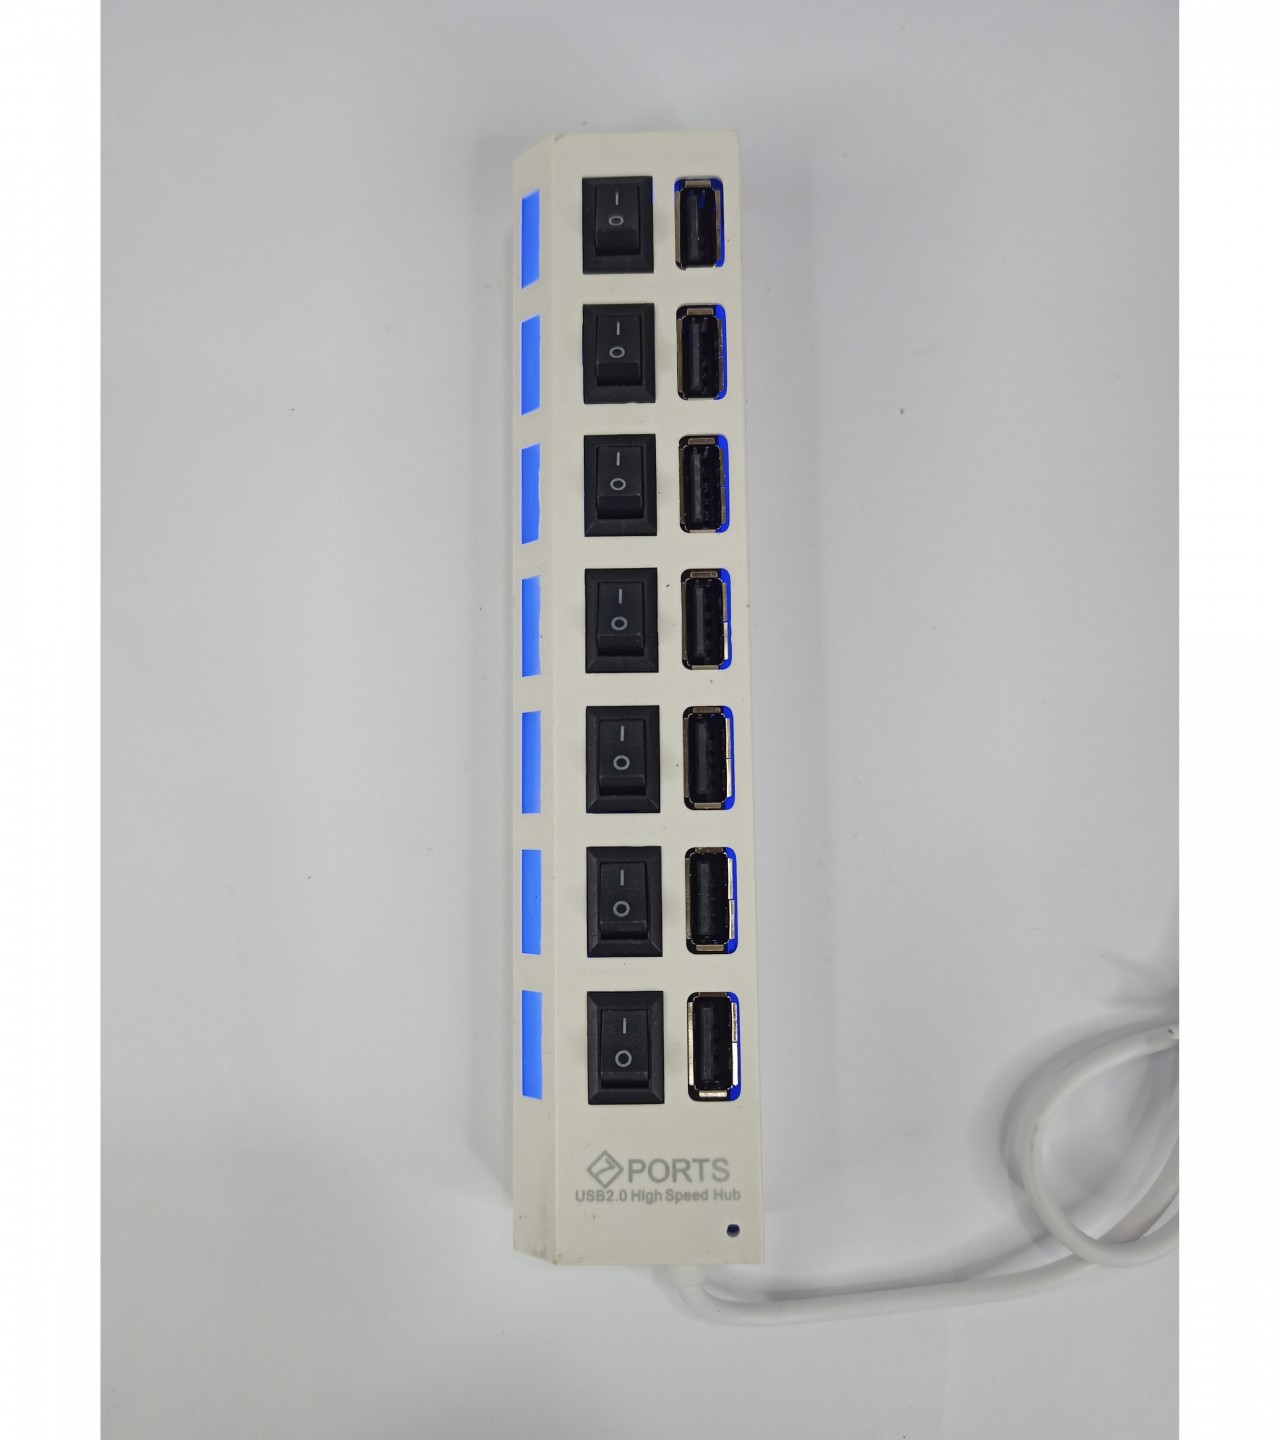 USB Hub 7 Port 2.0 With Switch and Lights